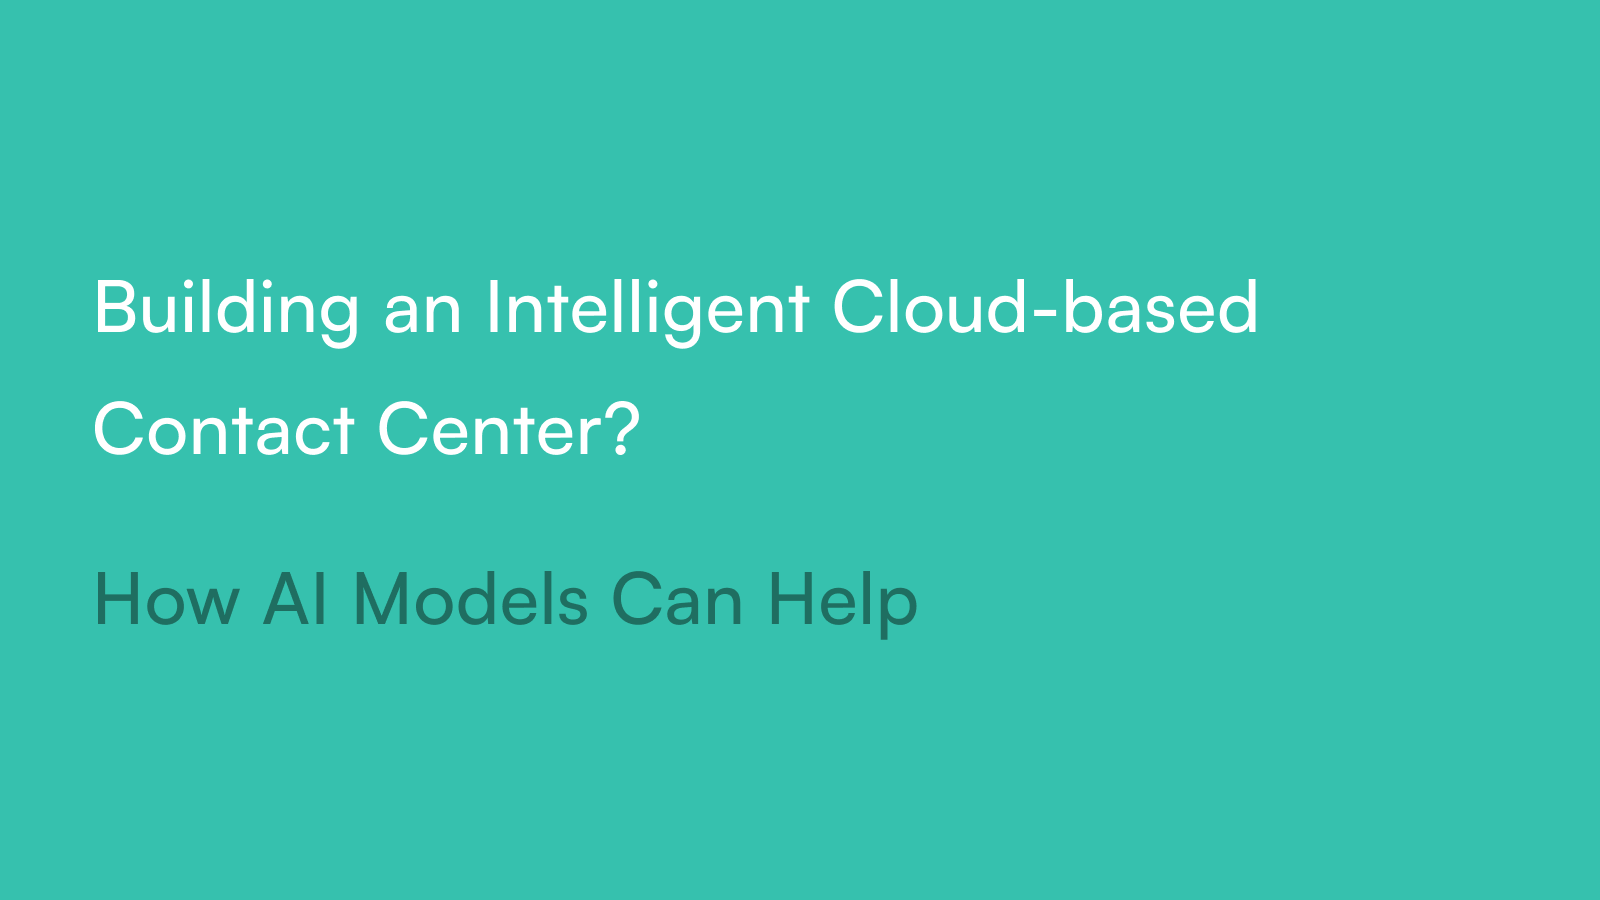 Building an Intelligent Cloud-based Contact Center? How AI Models Can Help